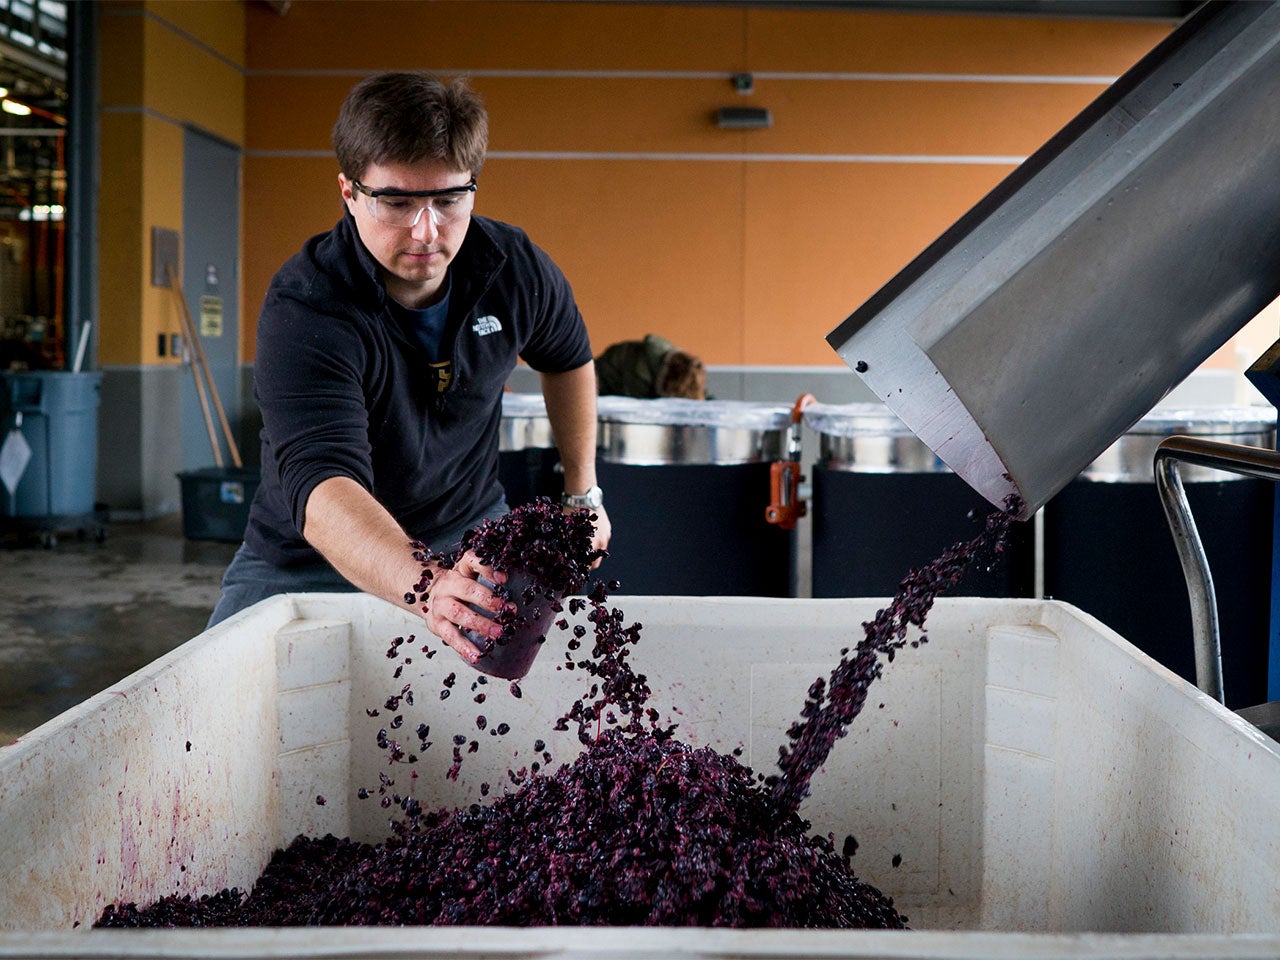 A student in goggles catches dark red crushed grapes in a cup from a chute pouring the crush into a bin.